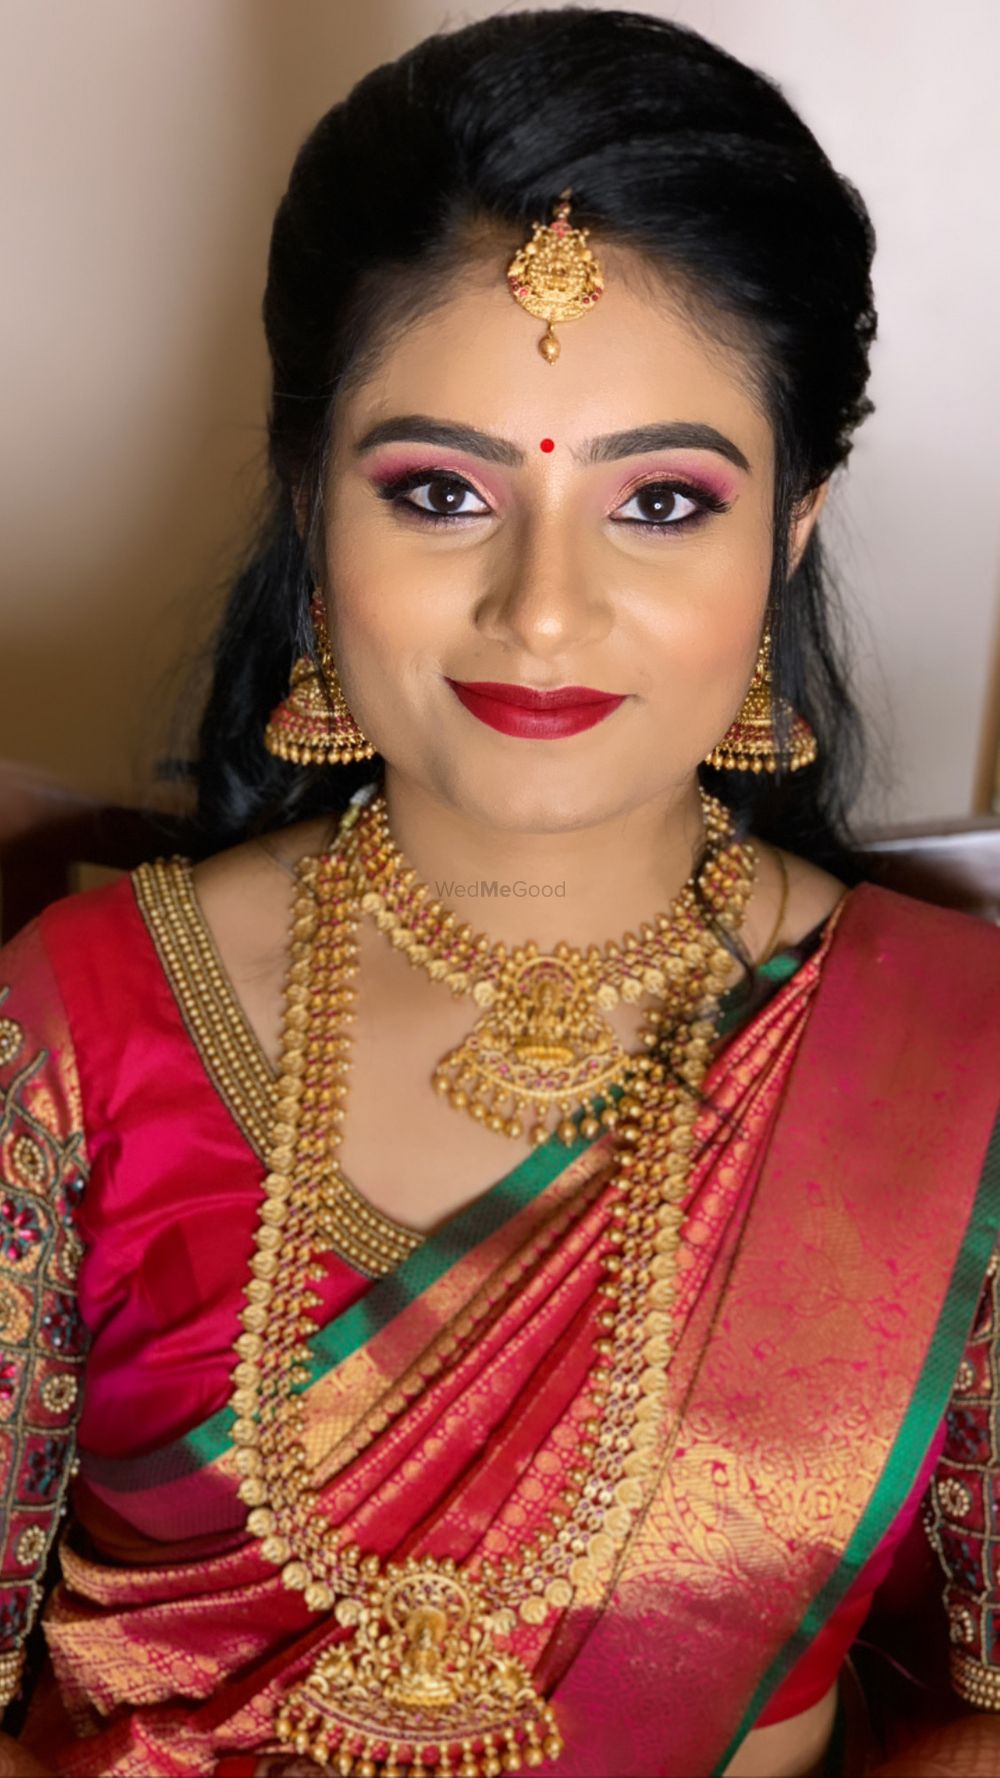 Photo From Makeovers by Lavanya - By Makeovers by Lavanya